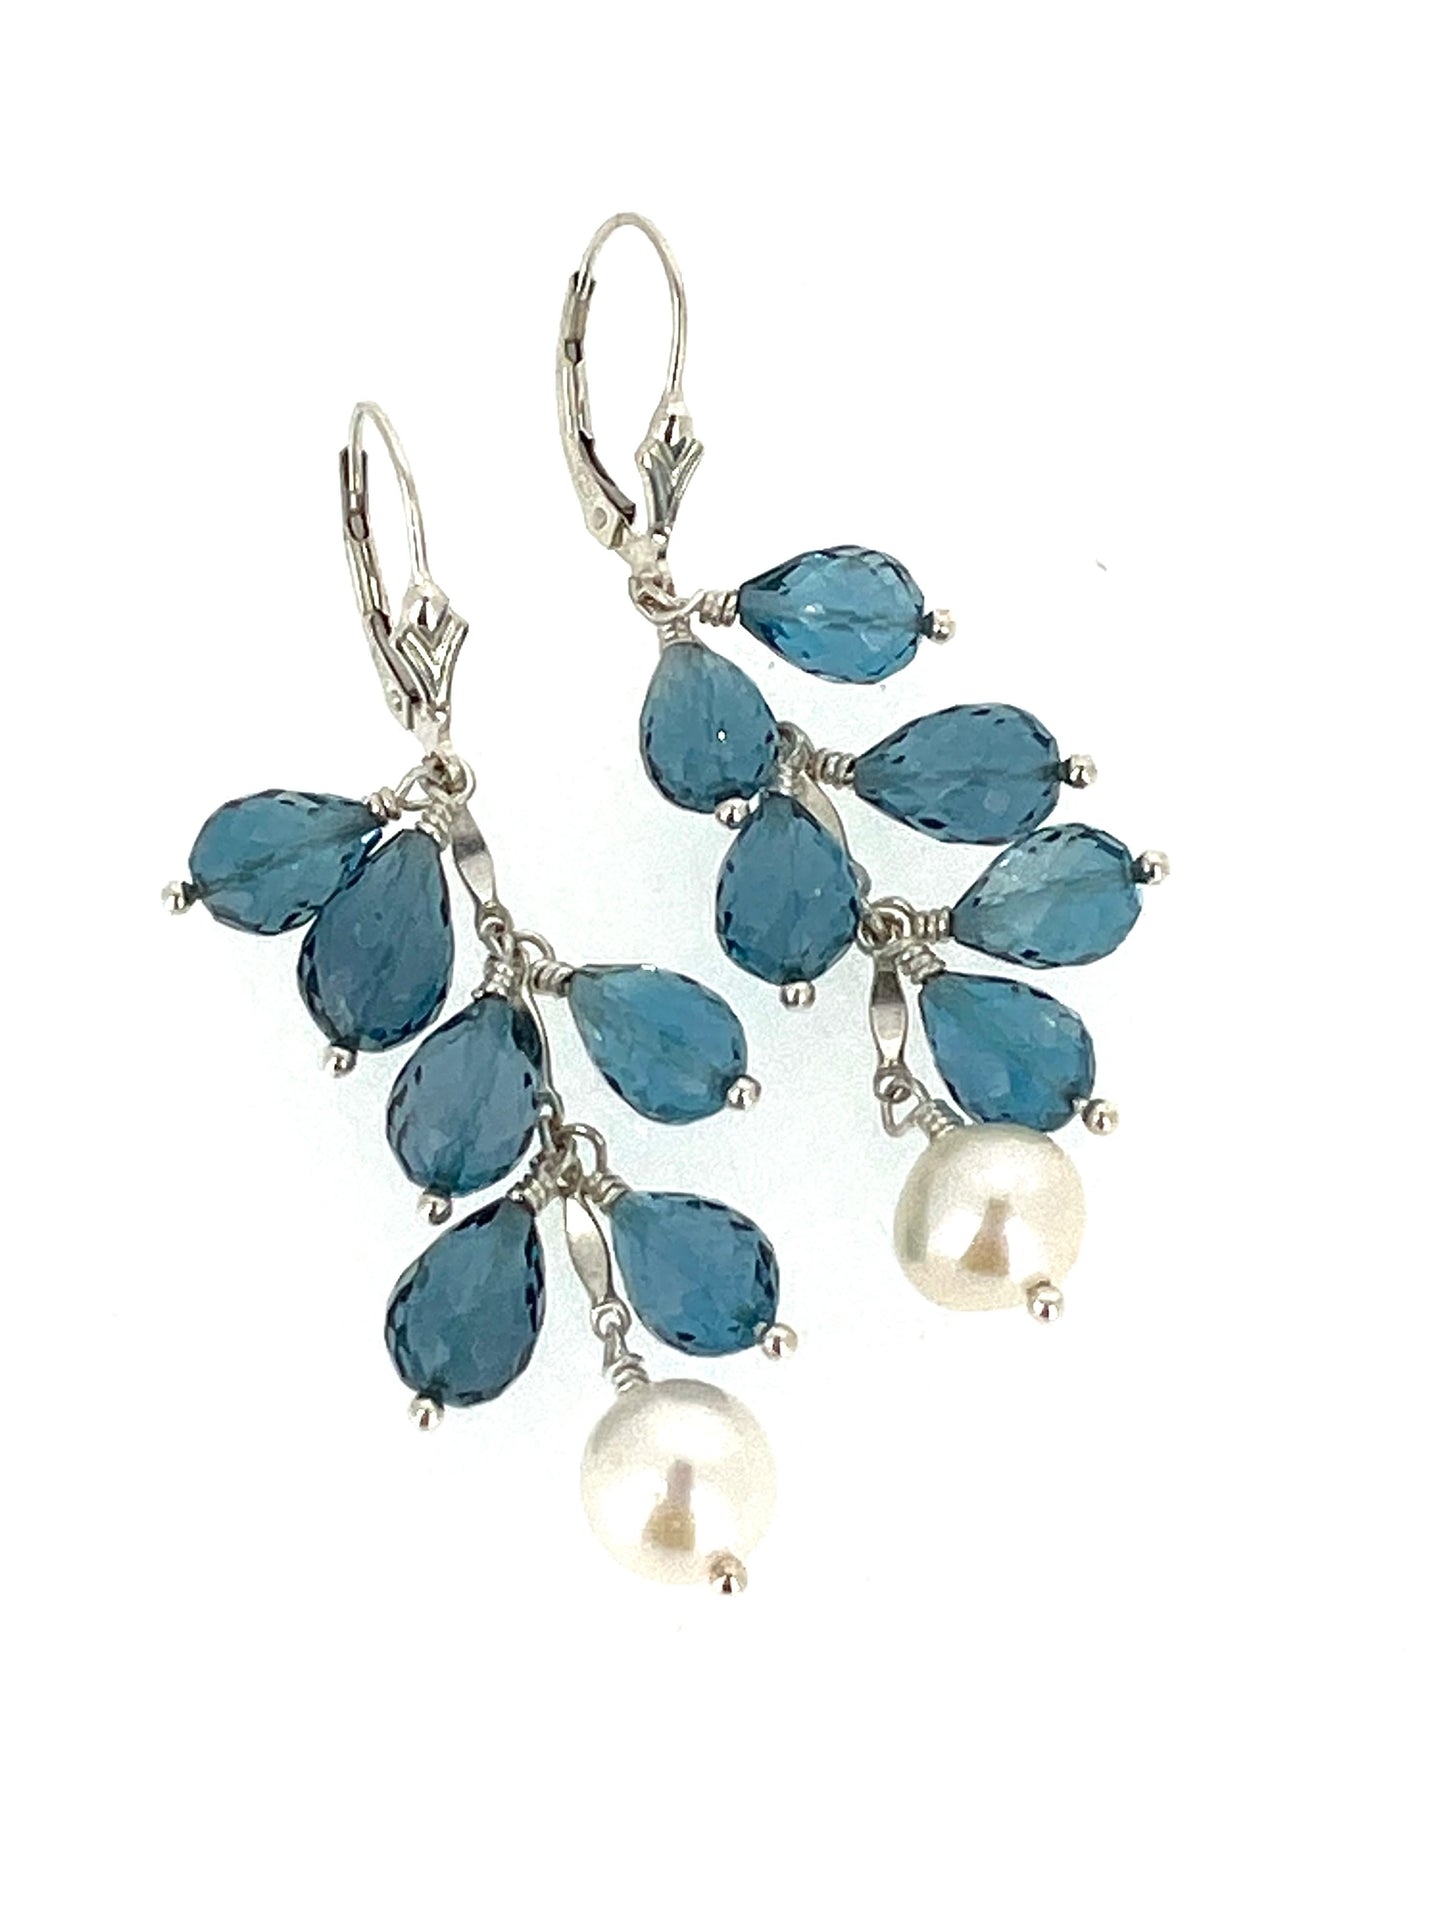 London Blue Topaz Briolette drops and Cultured Pearls on Sterling Silver Leverbacks